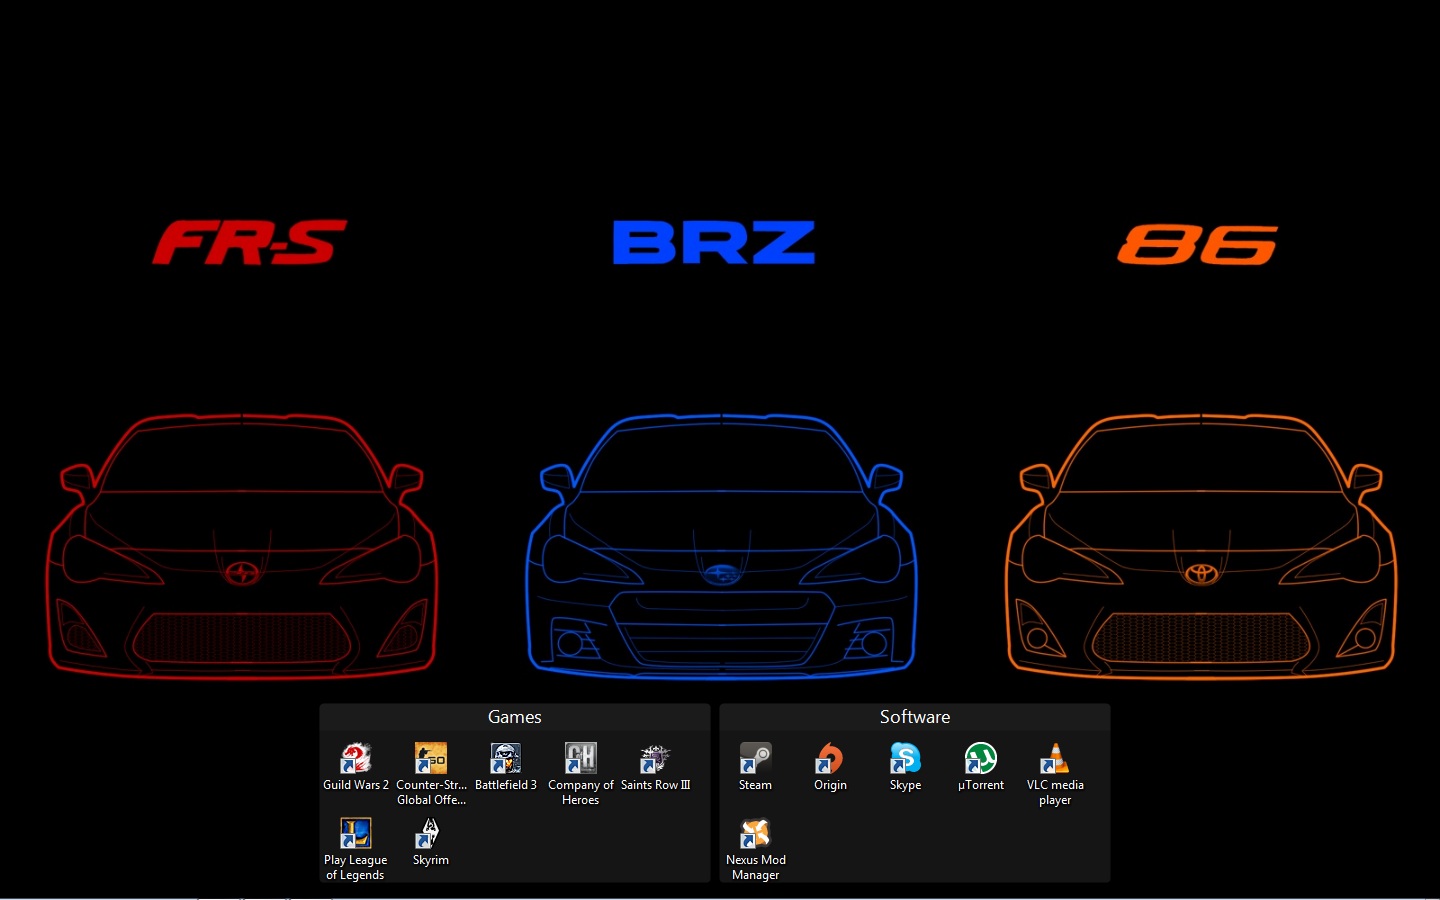 Scion Frs Wallpapers